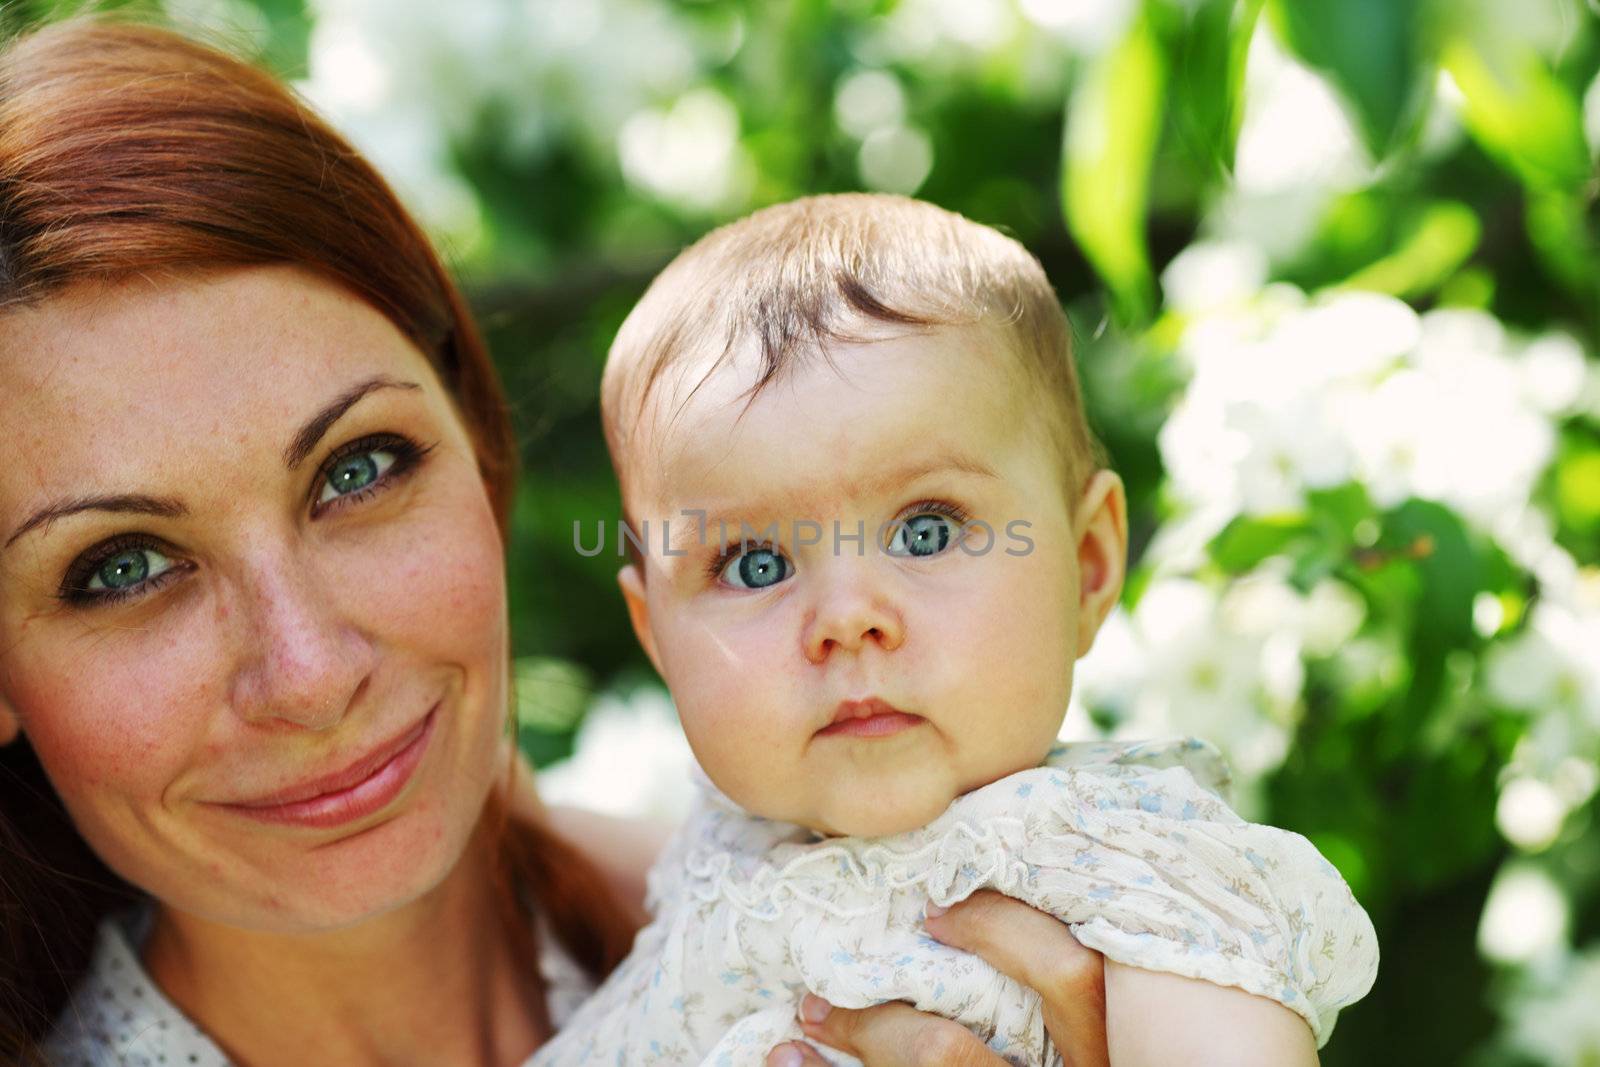 Mother and daughter close up portrait on flower background